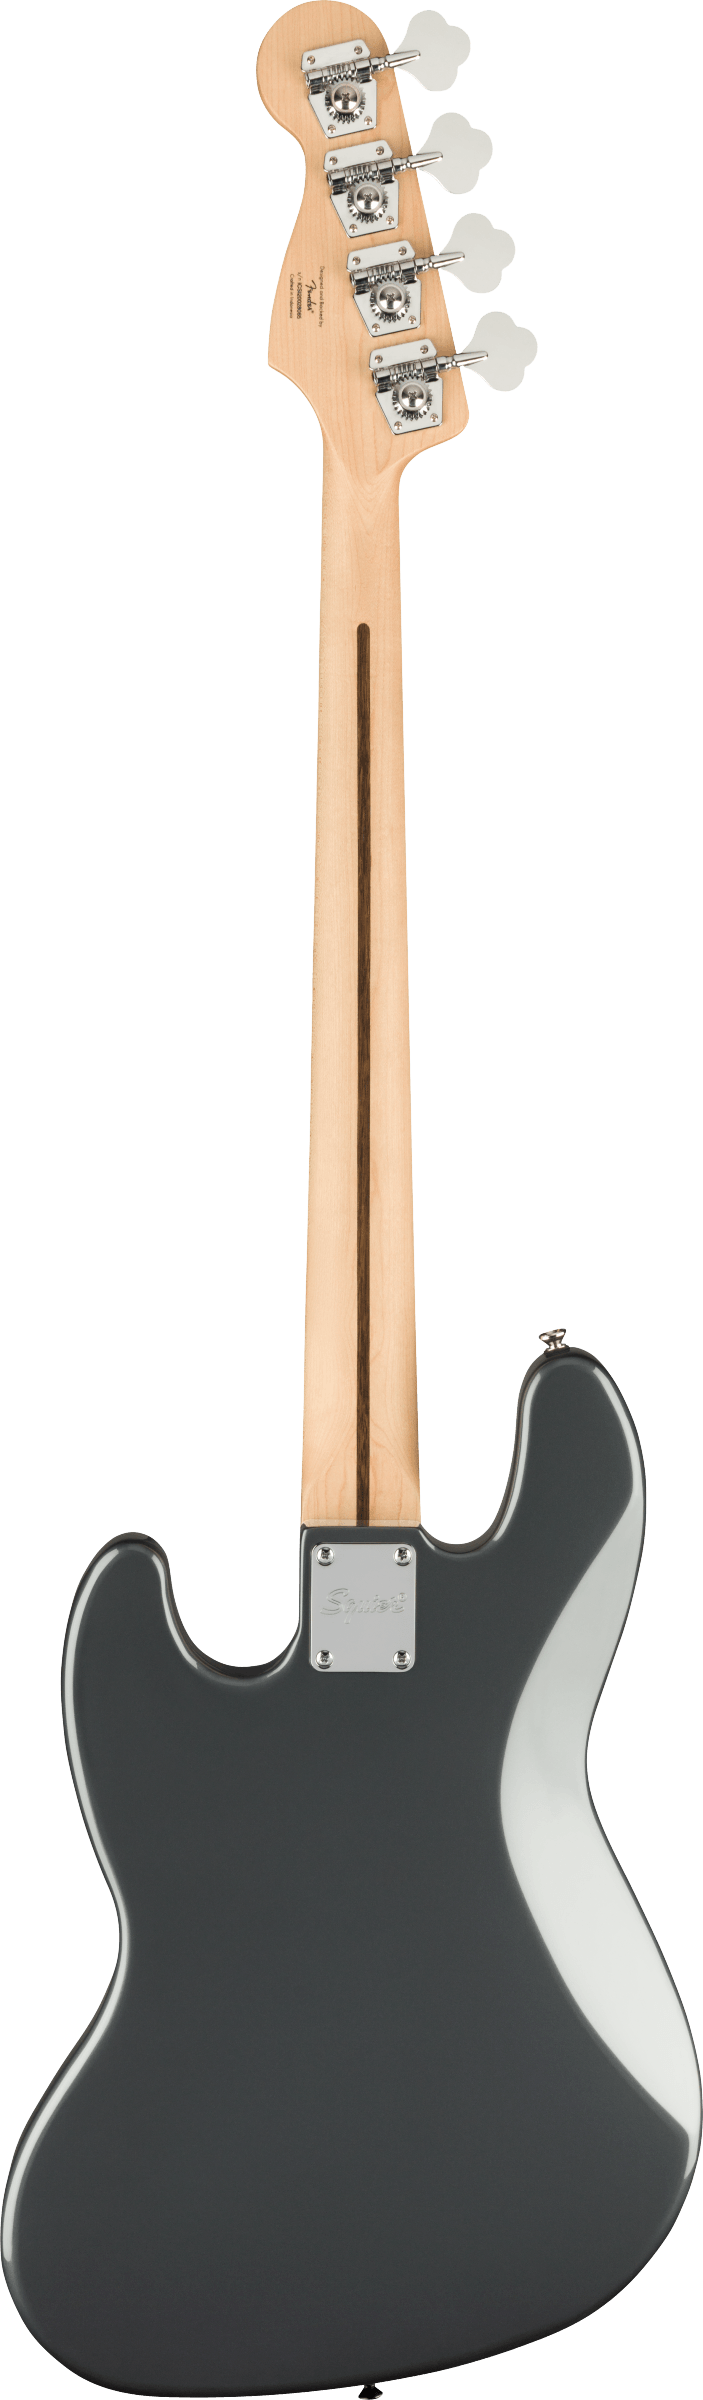 Squier Affinity Series Jazz Bass - Charcoal Frost Metallic - Joondalup Music Centre